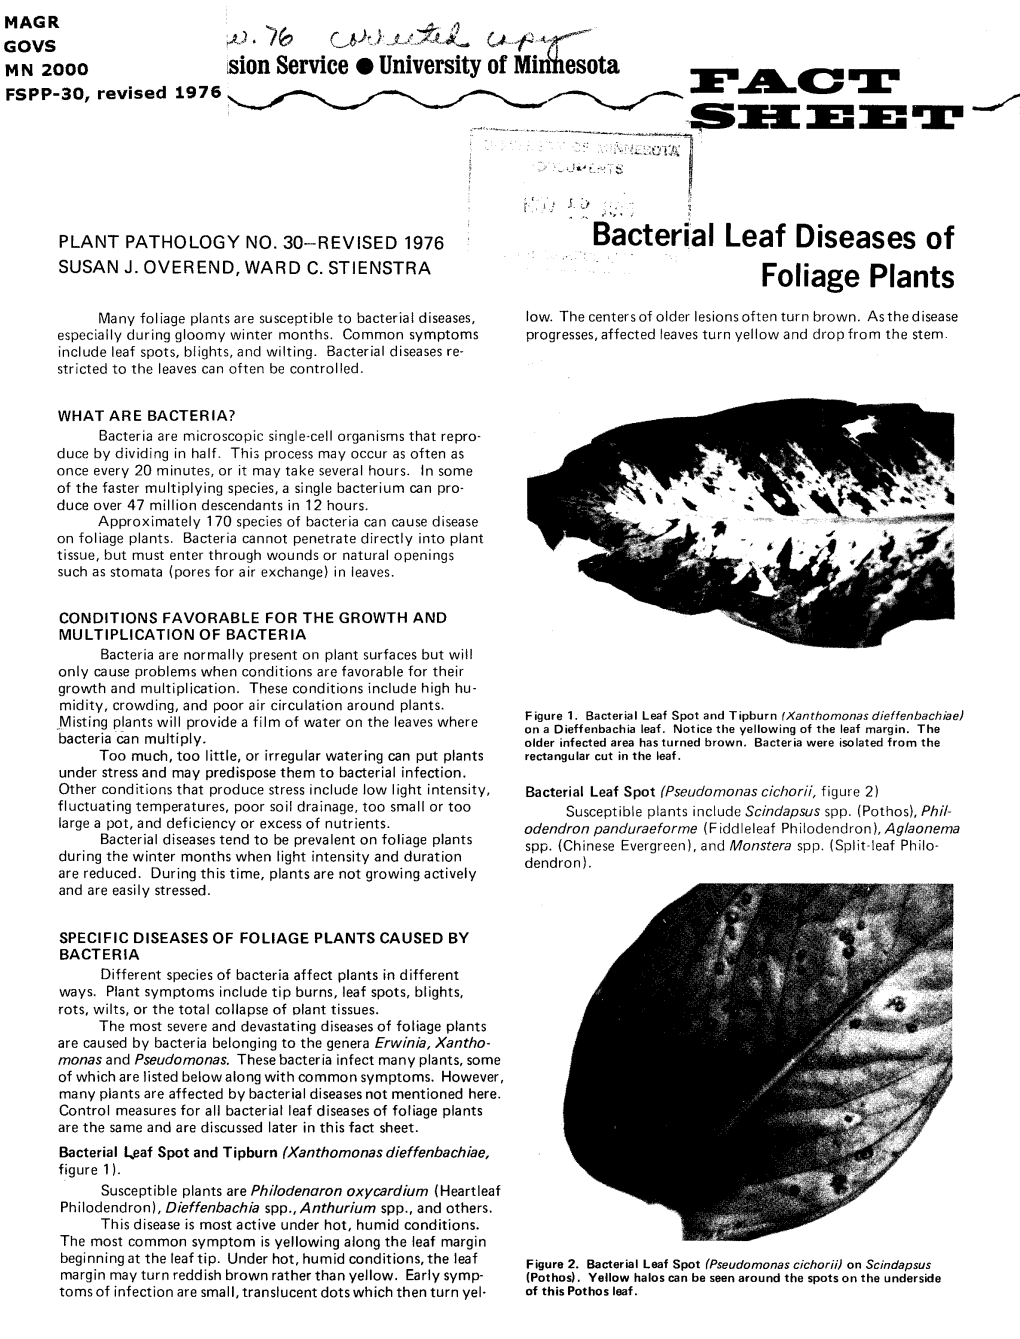 Bacterial Leaf Diseases of Foliage Plants Are the Same and Are Discussed Later in This Fact Sheet